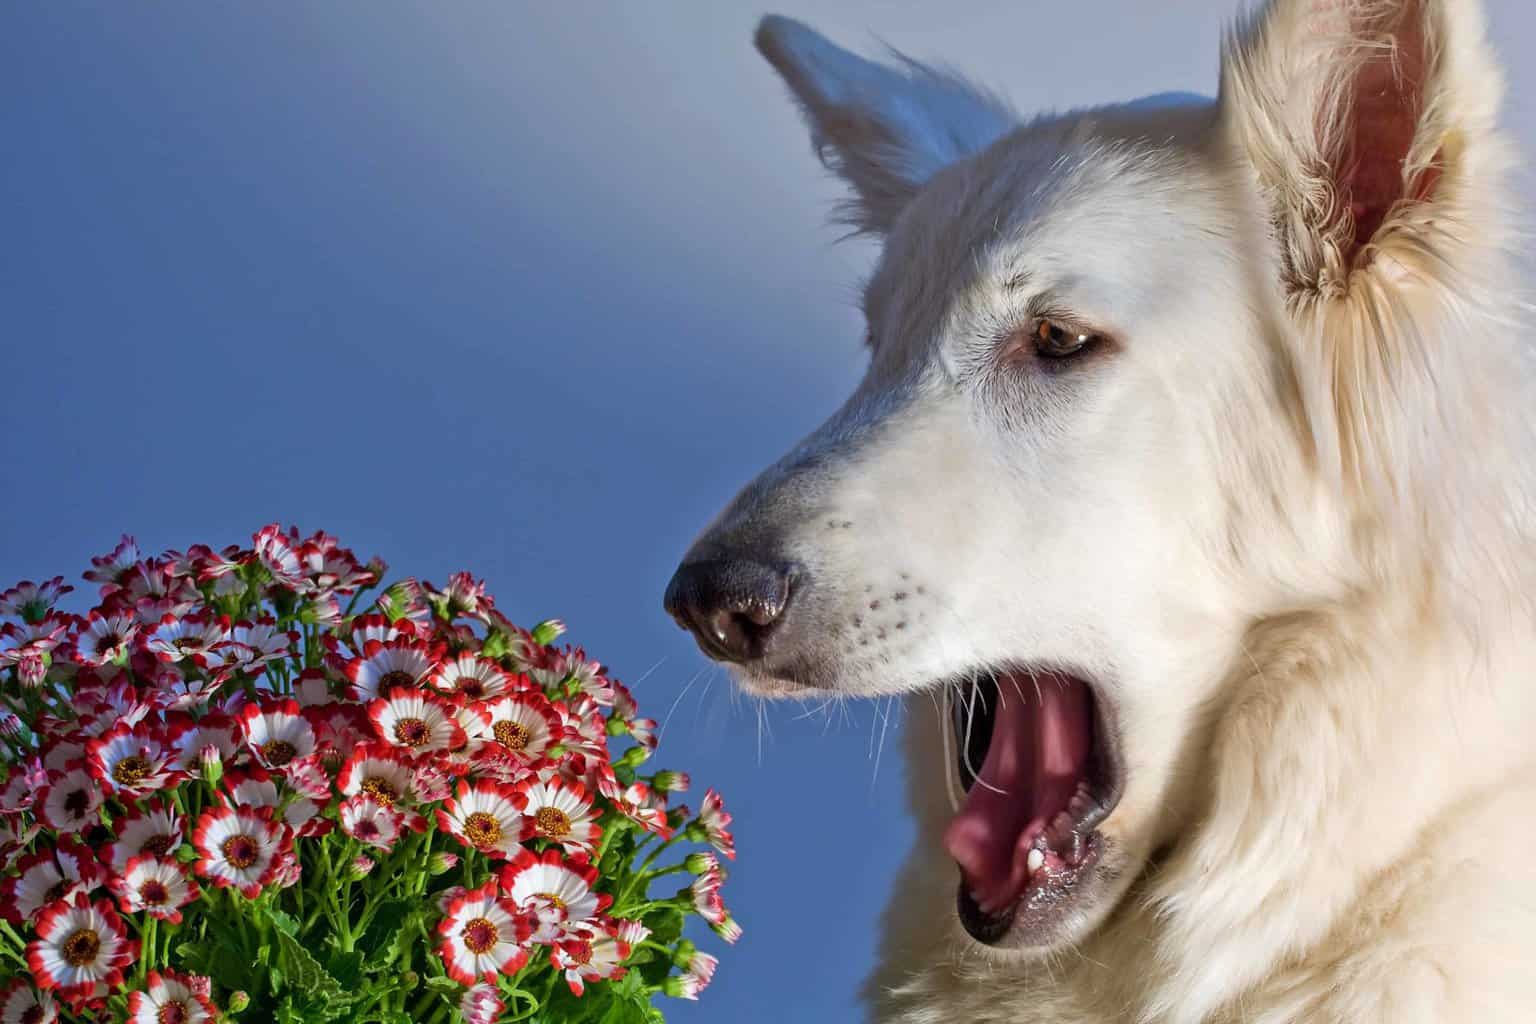 Photo illustration of dog sneezing after being exposed to flowers.